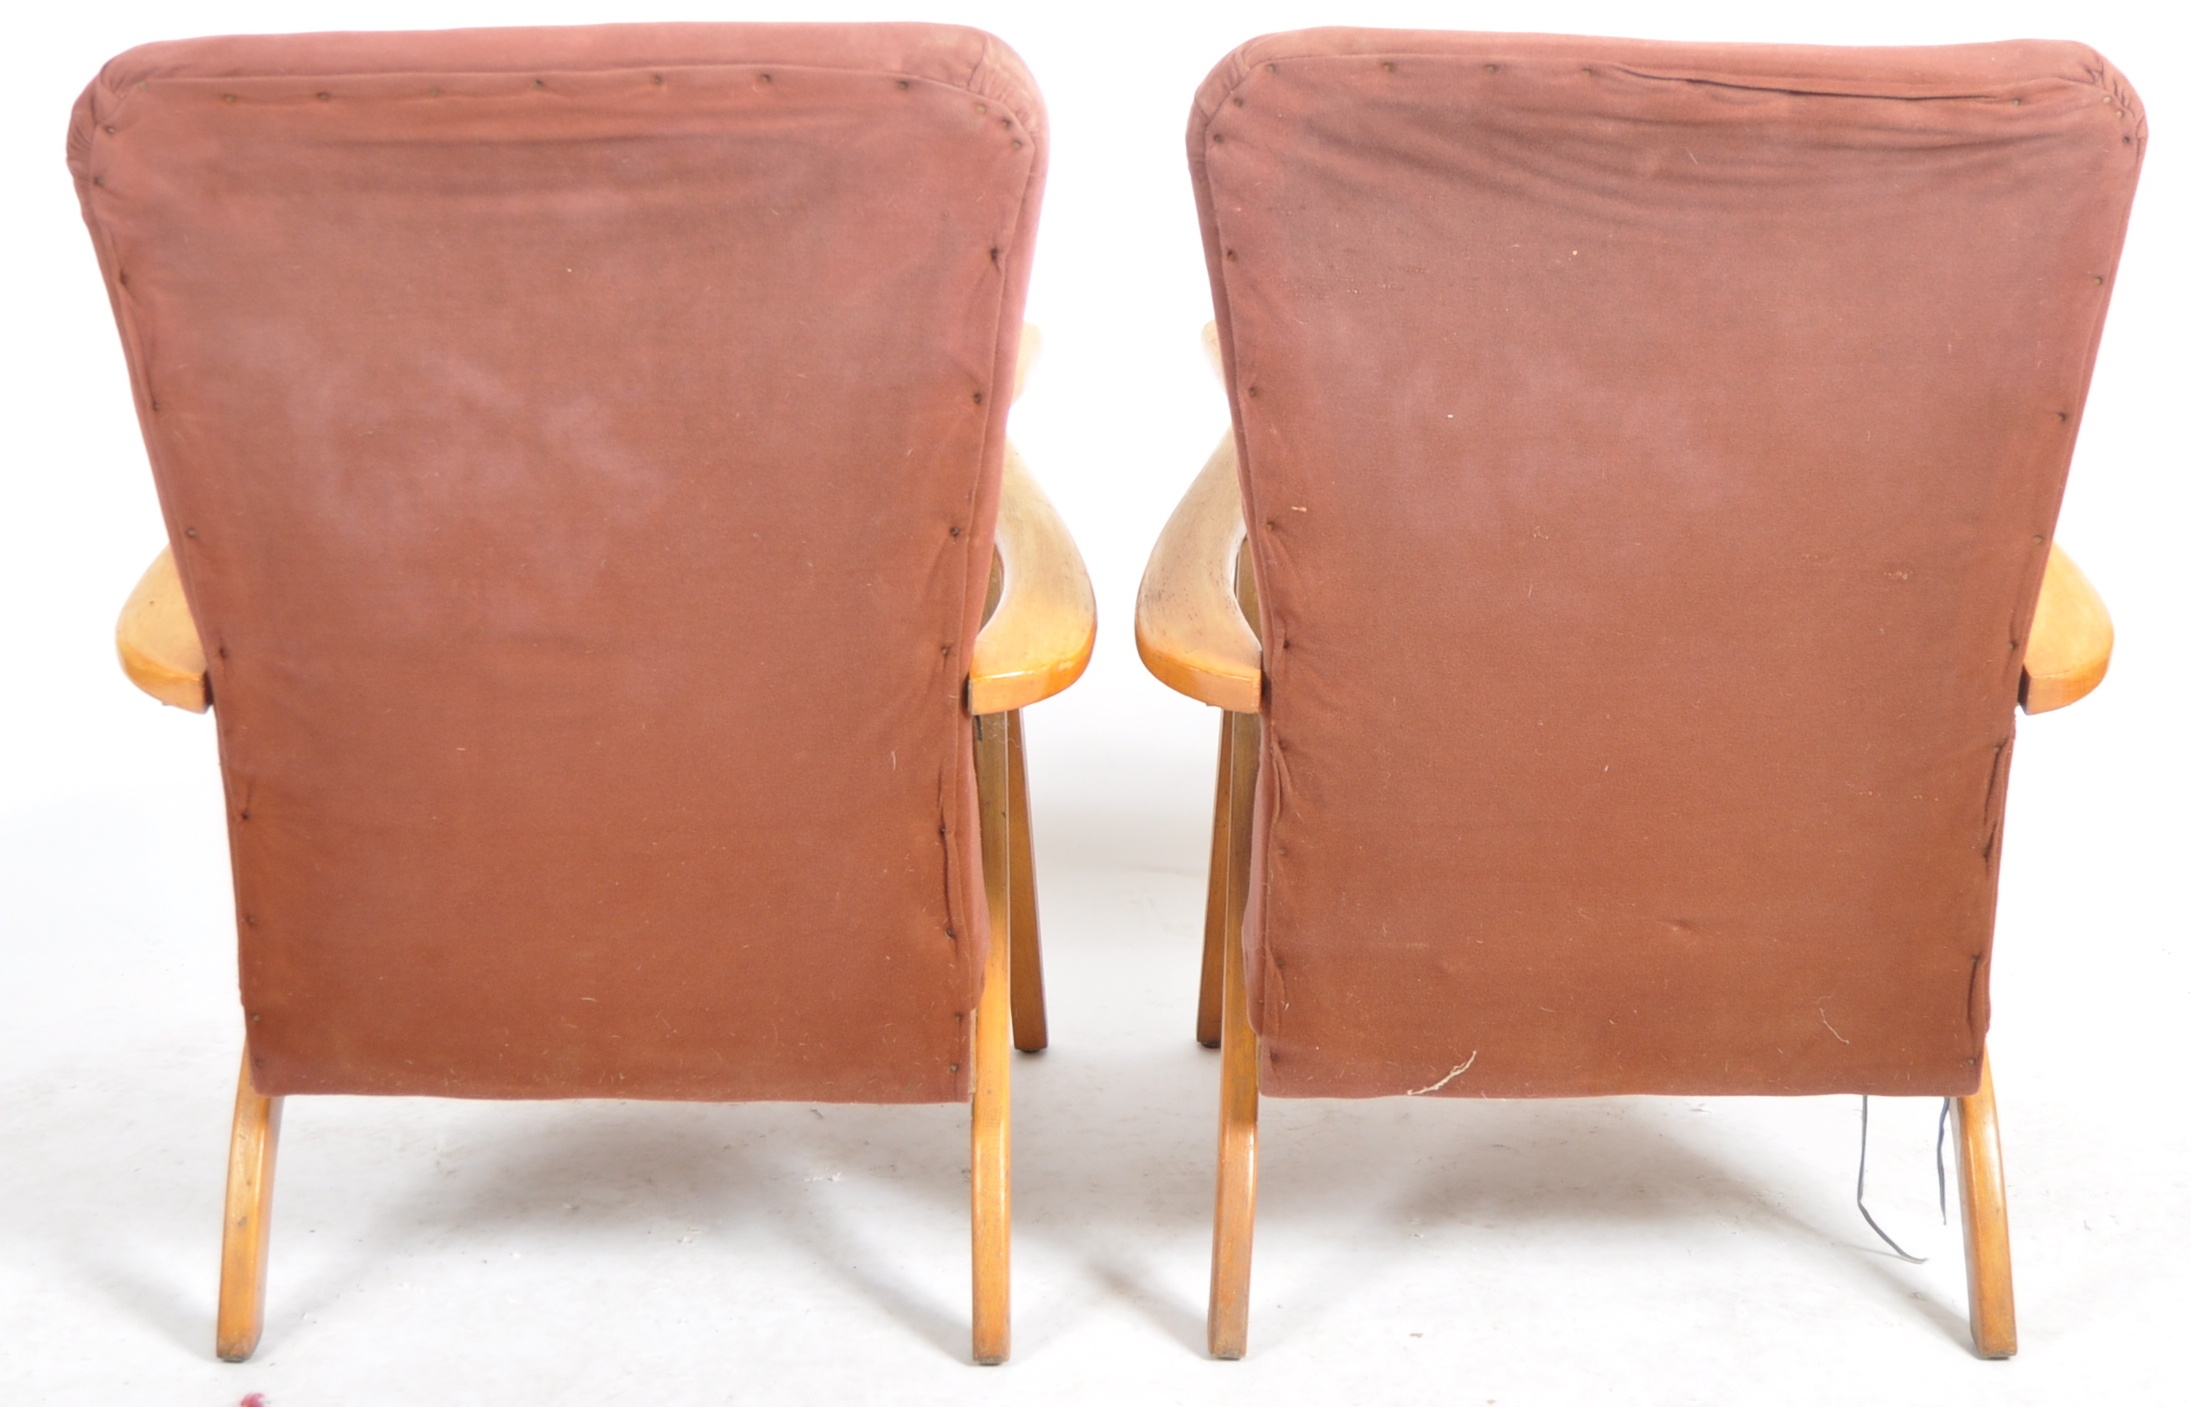 MATCHING PAIR OF VINTAGE OAK FRAMED ARMCHAIRS - Image 6 of 6